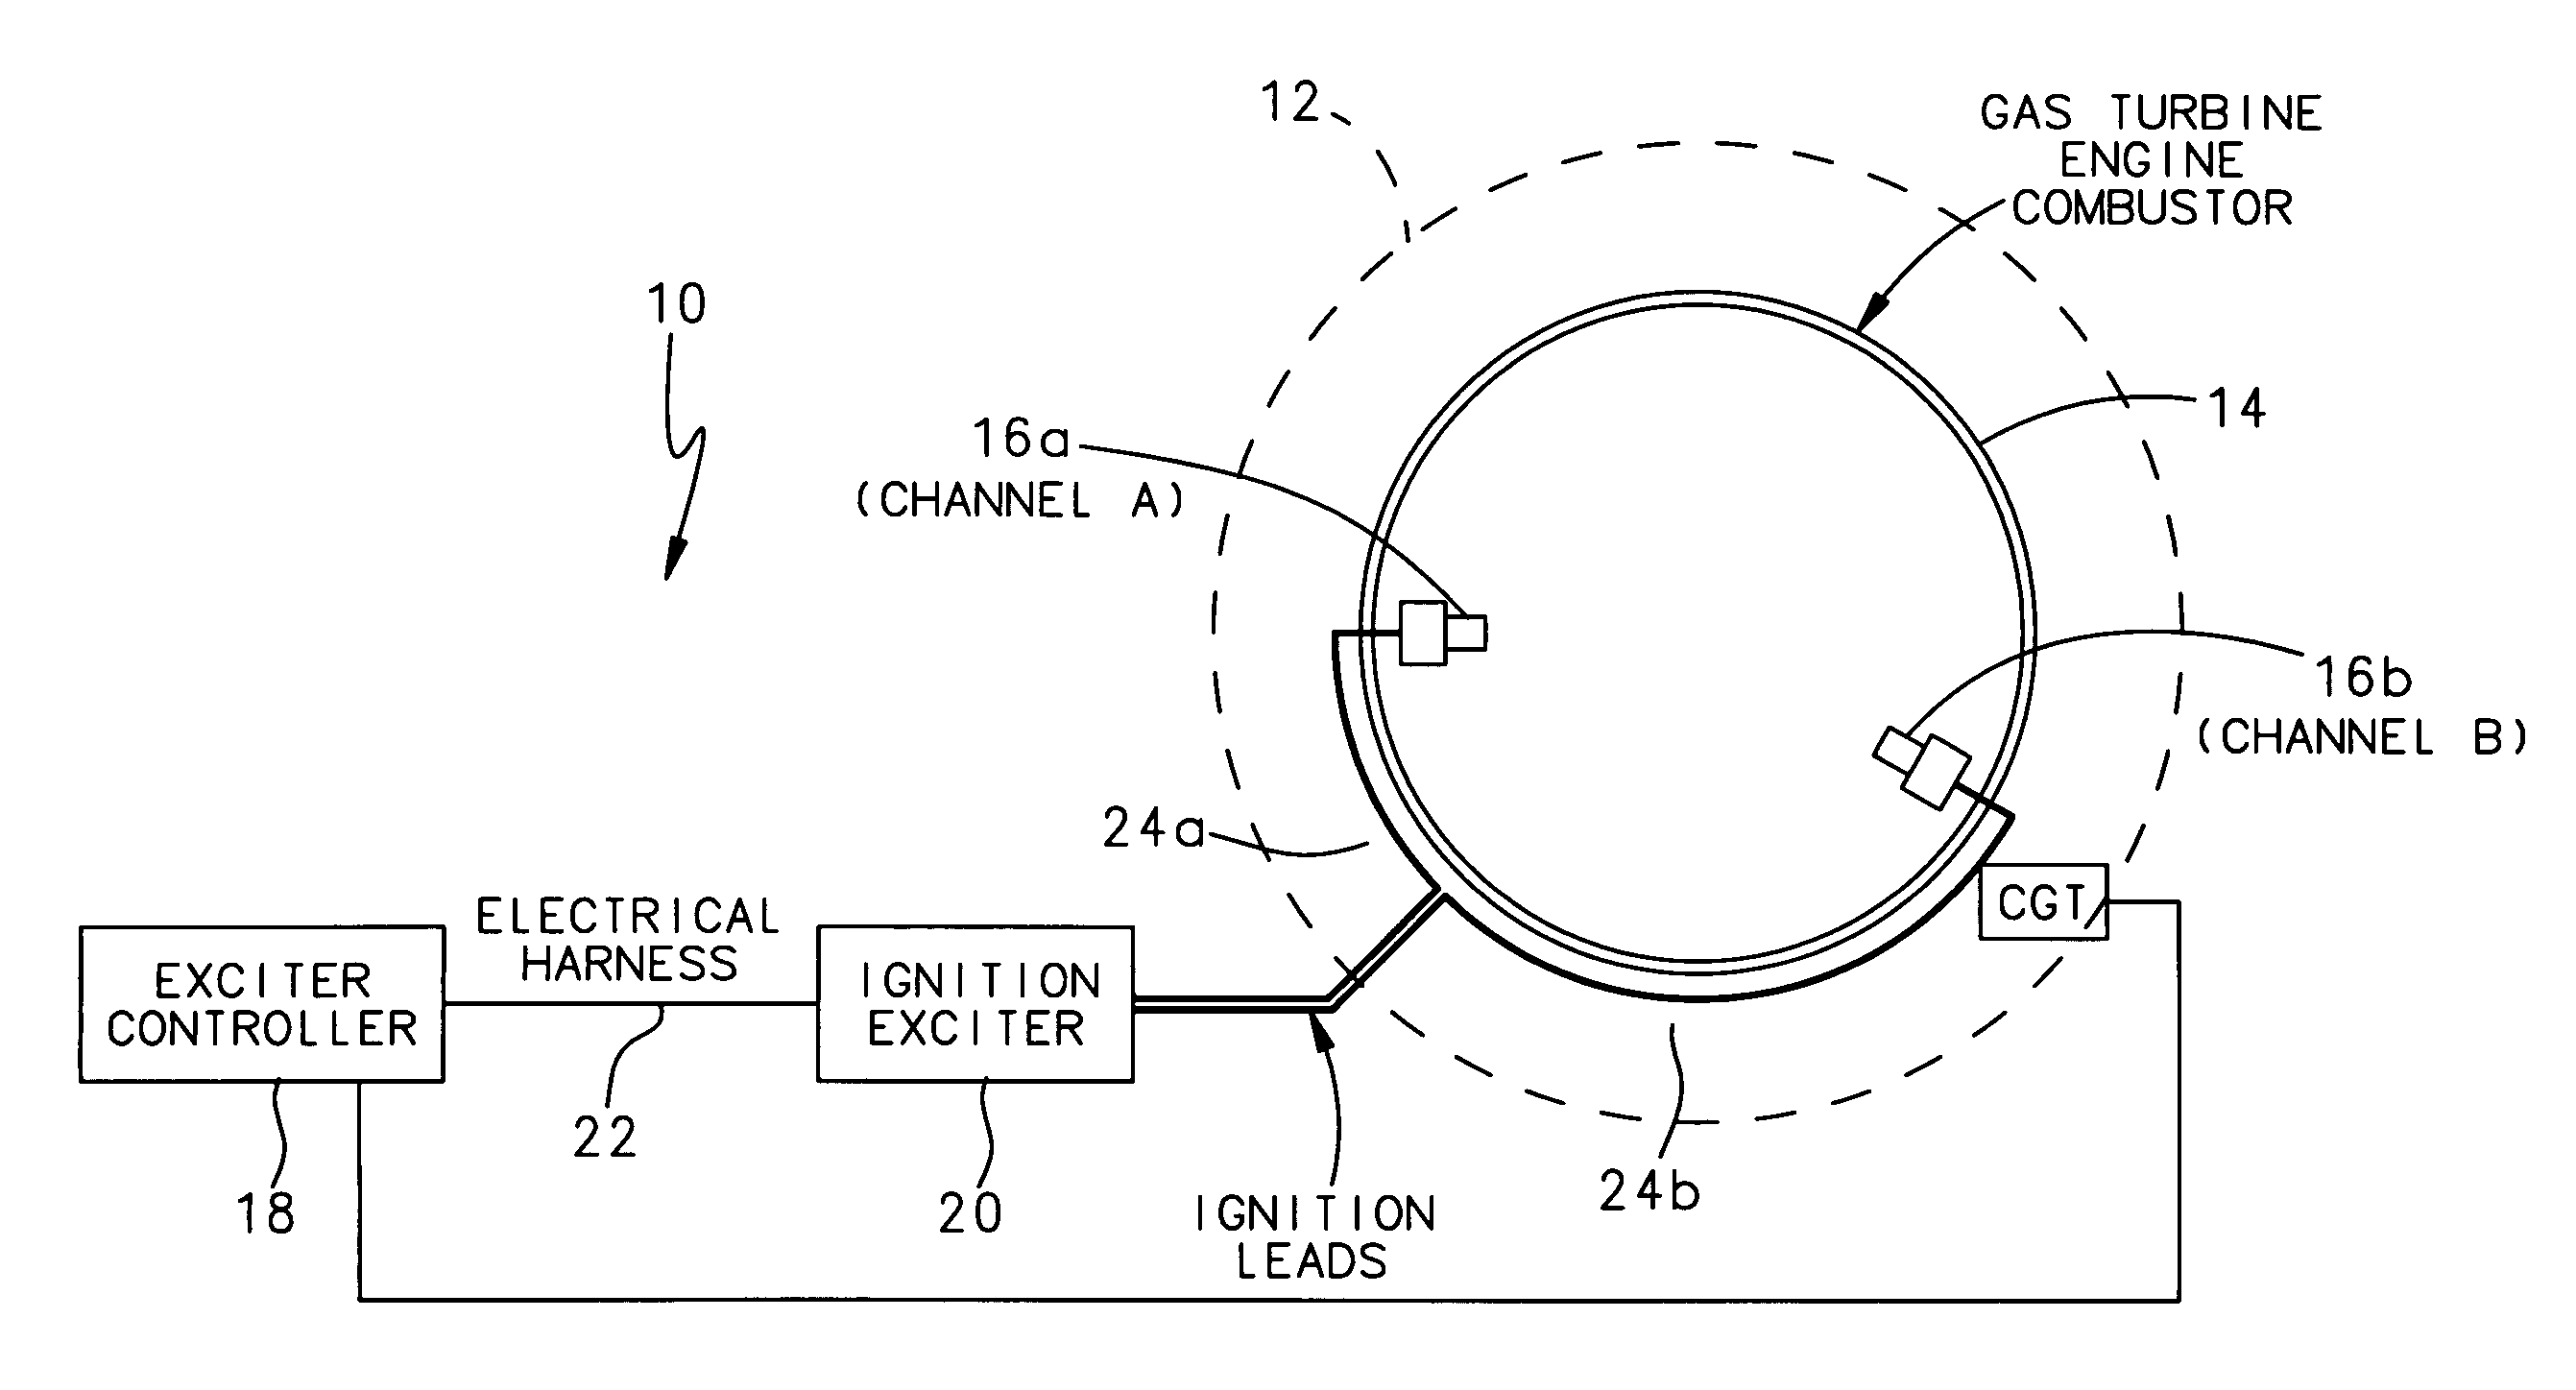 Dual ignition system for a gas turbine engine